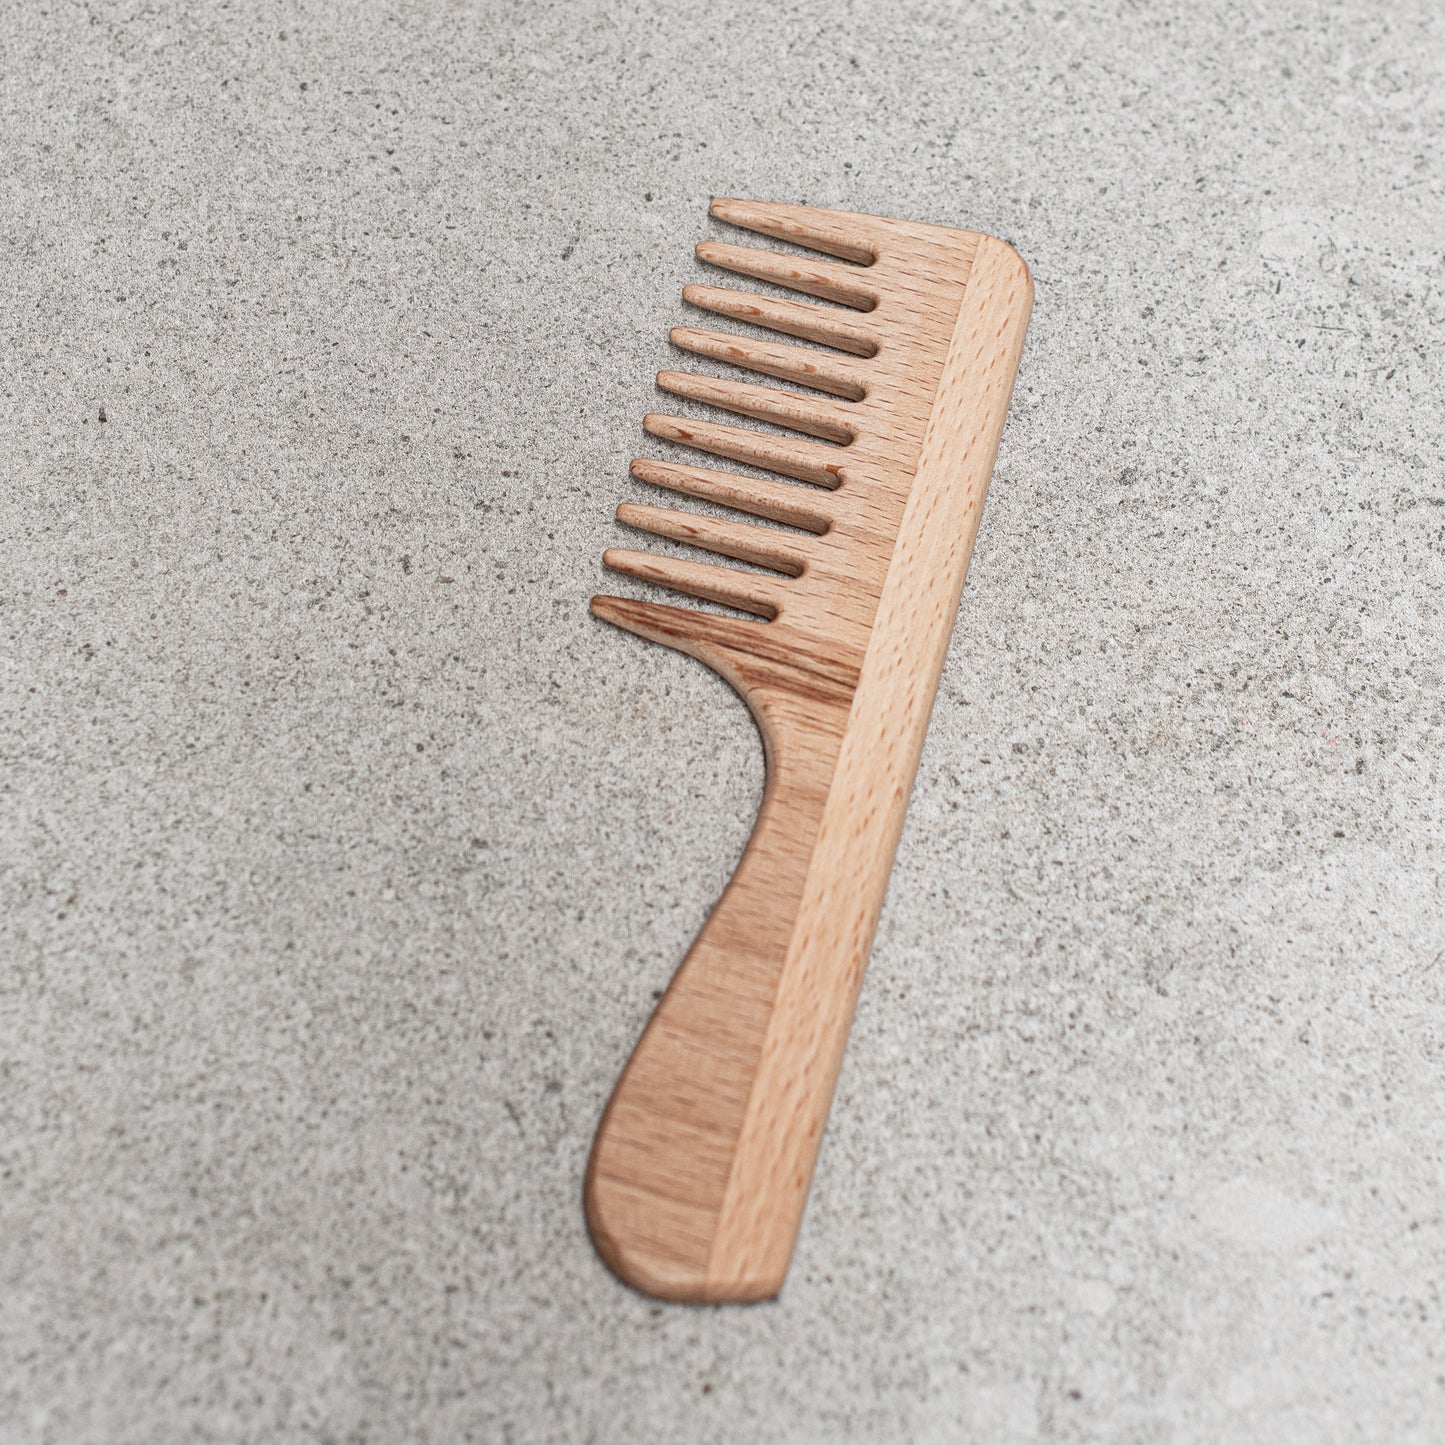 Wooden Comb with Grip Handle.